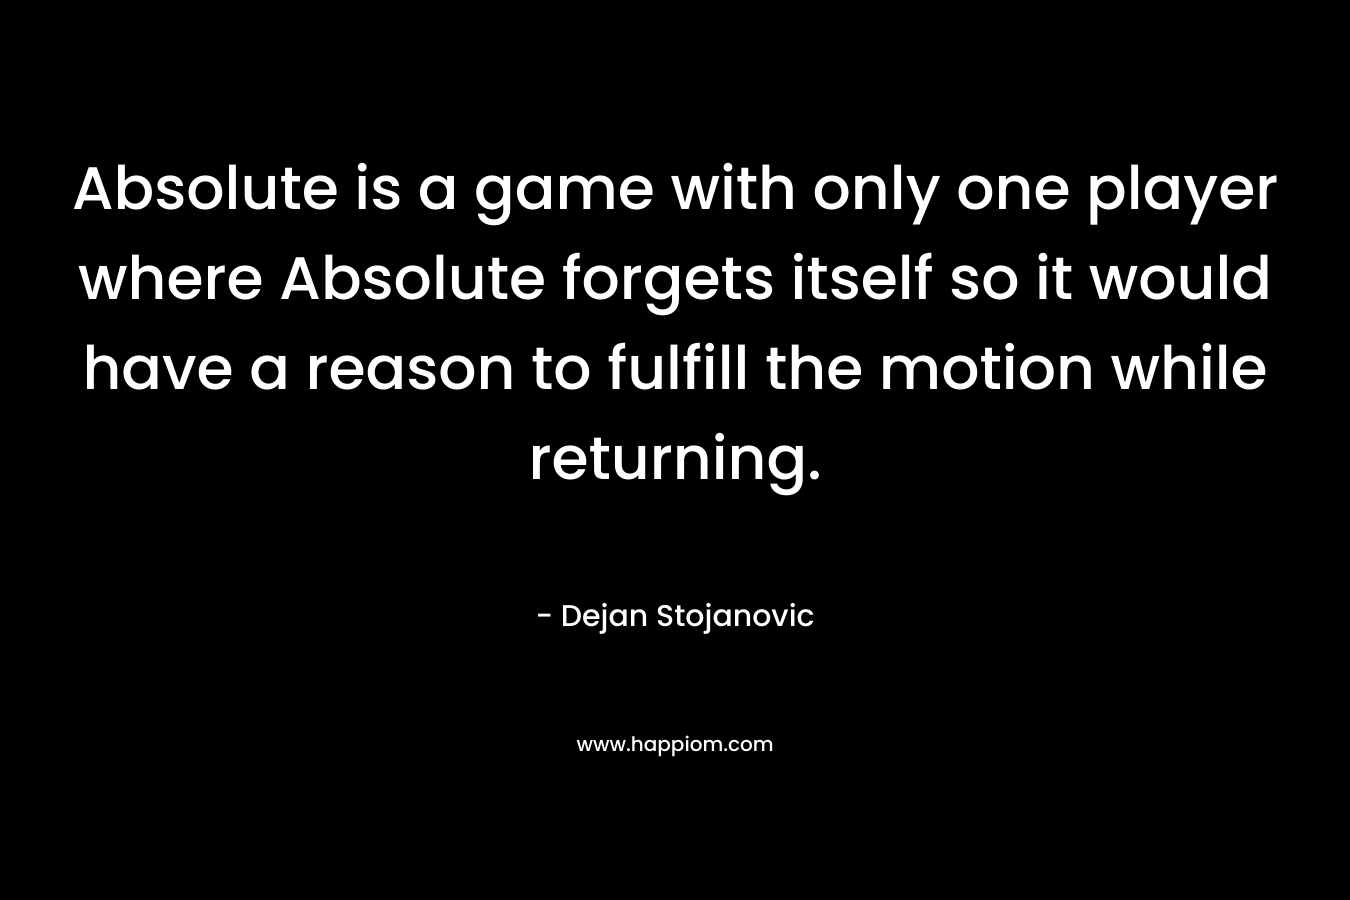 Absolute is a game with only one player where Absolute forgets itself so it would have a reason to fulfill the motion while returning.